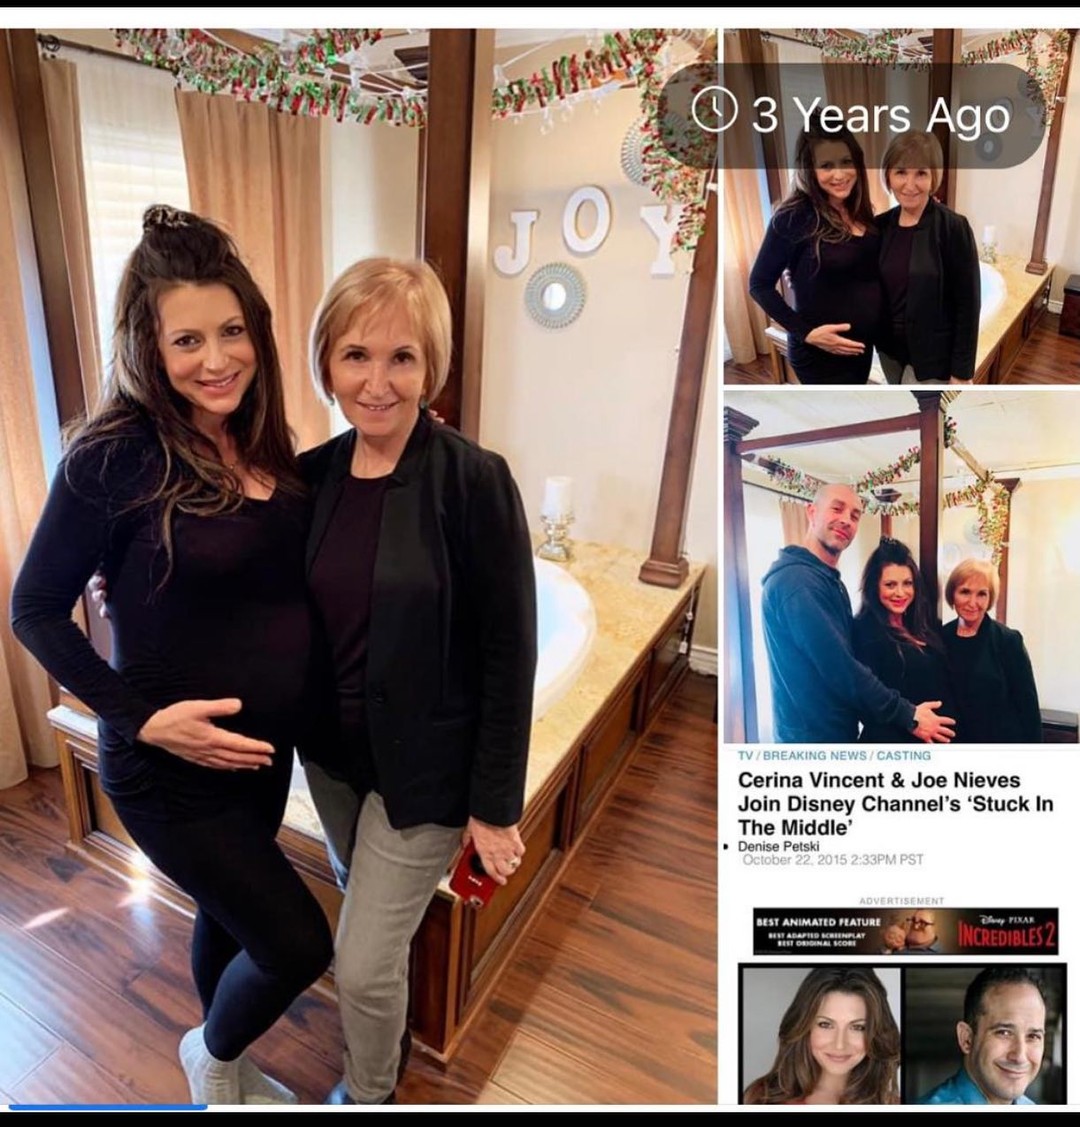 Received a pop up of a beautiful memory 💞🤗
We love you @cerinavincent ❣️

#naturalbirth #midwifelife #midwife #midwifery #homebirth #waterbirth #hospitalbirth #birthcenter #birthcenterbirth #birthwithoutfear #positivebirth